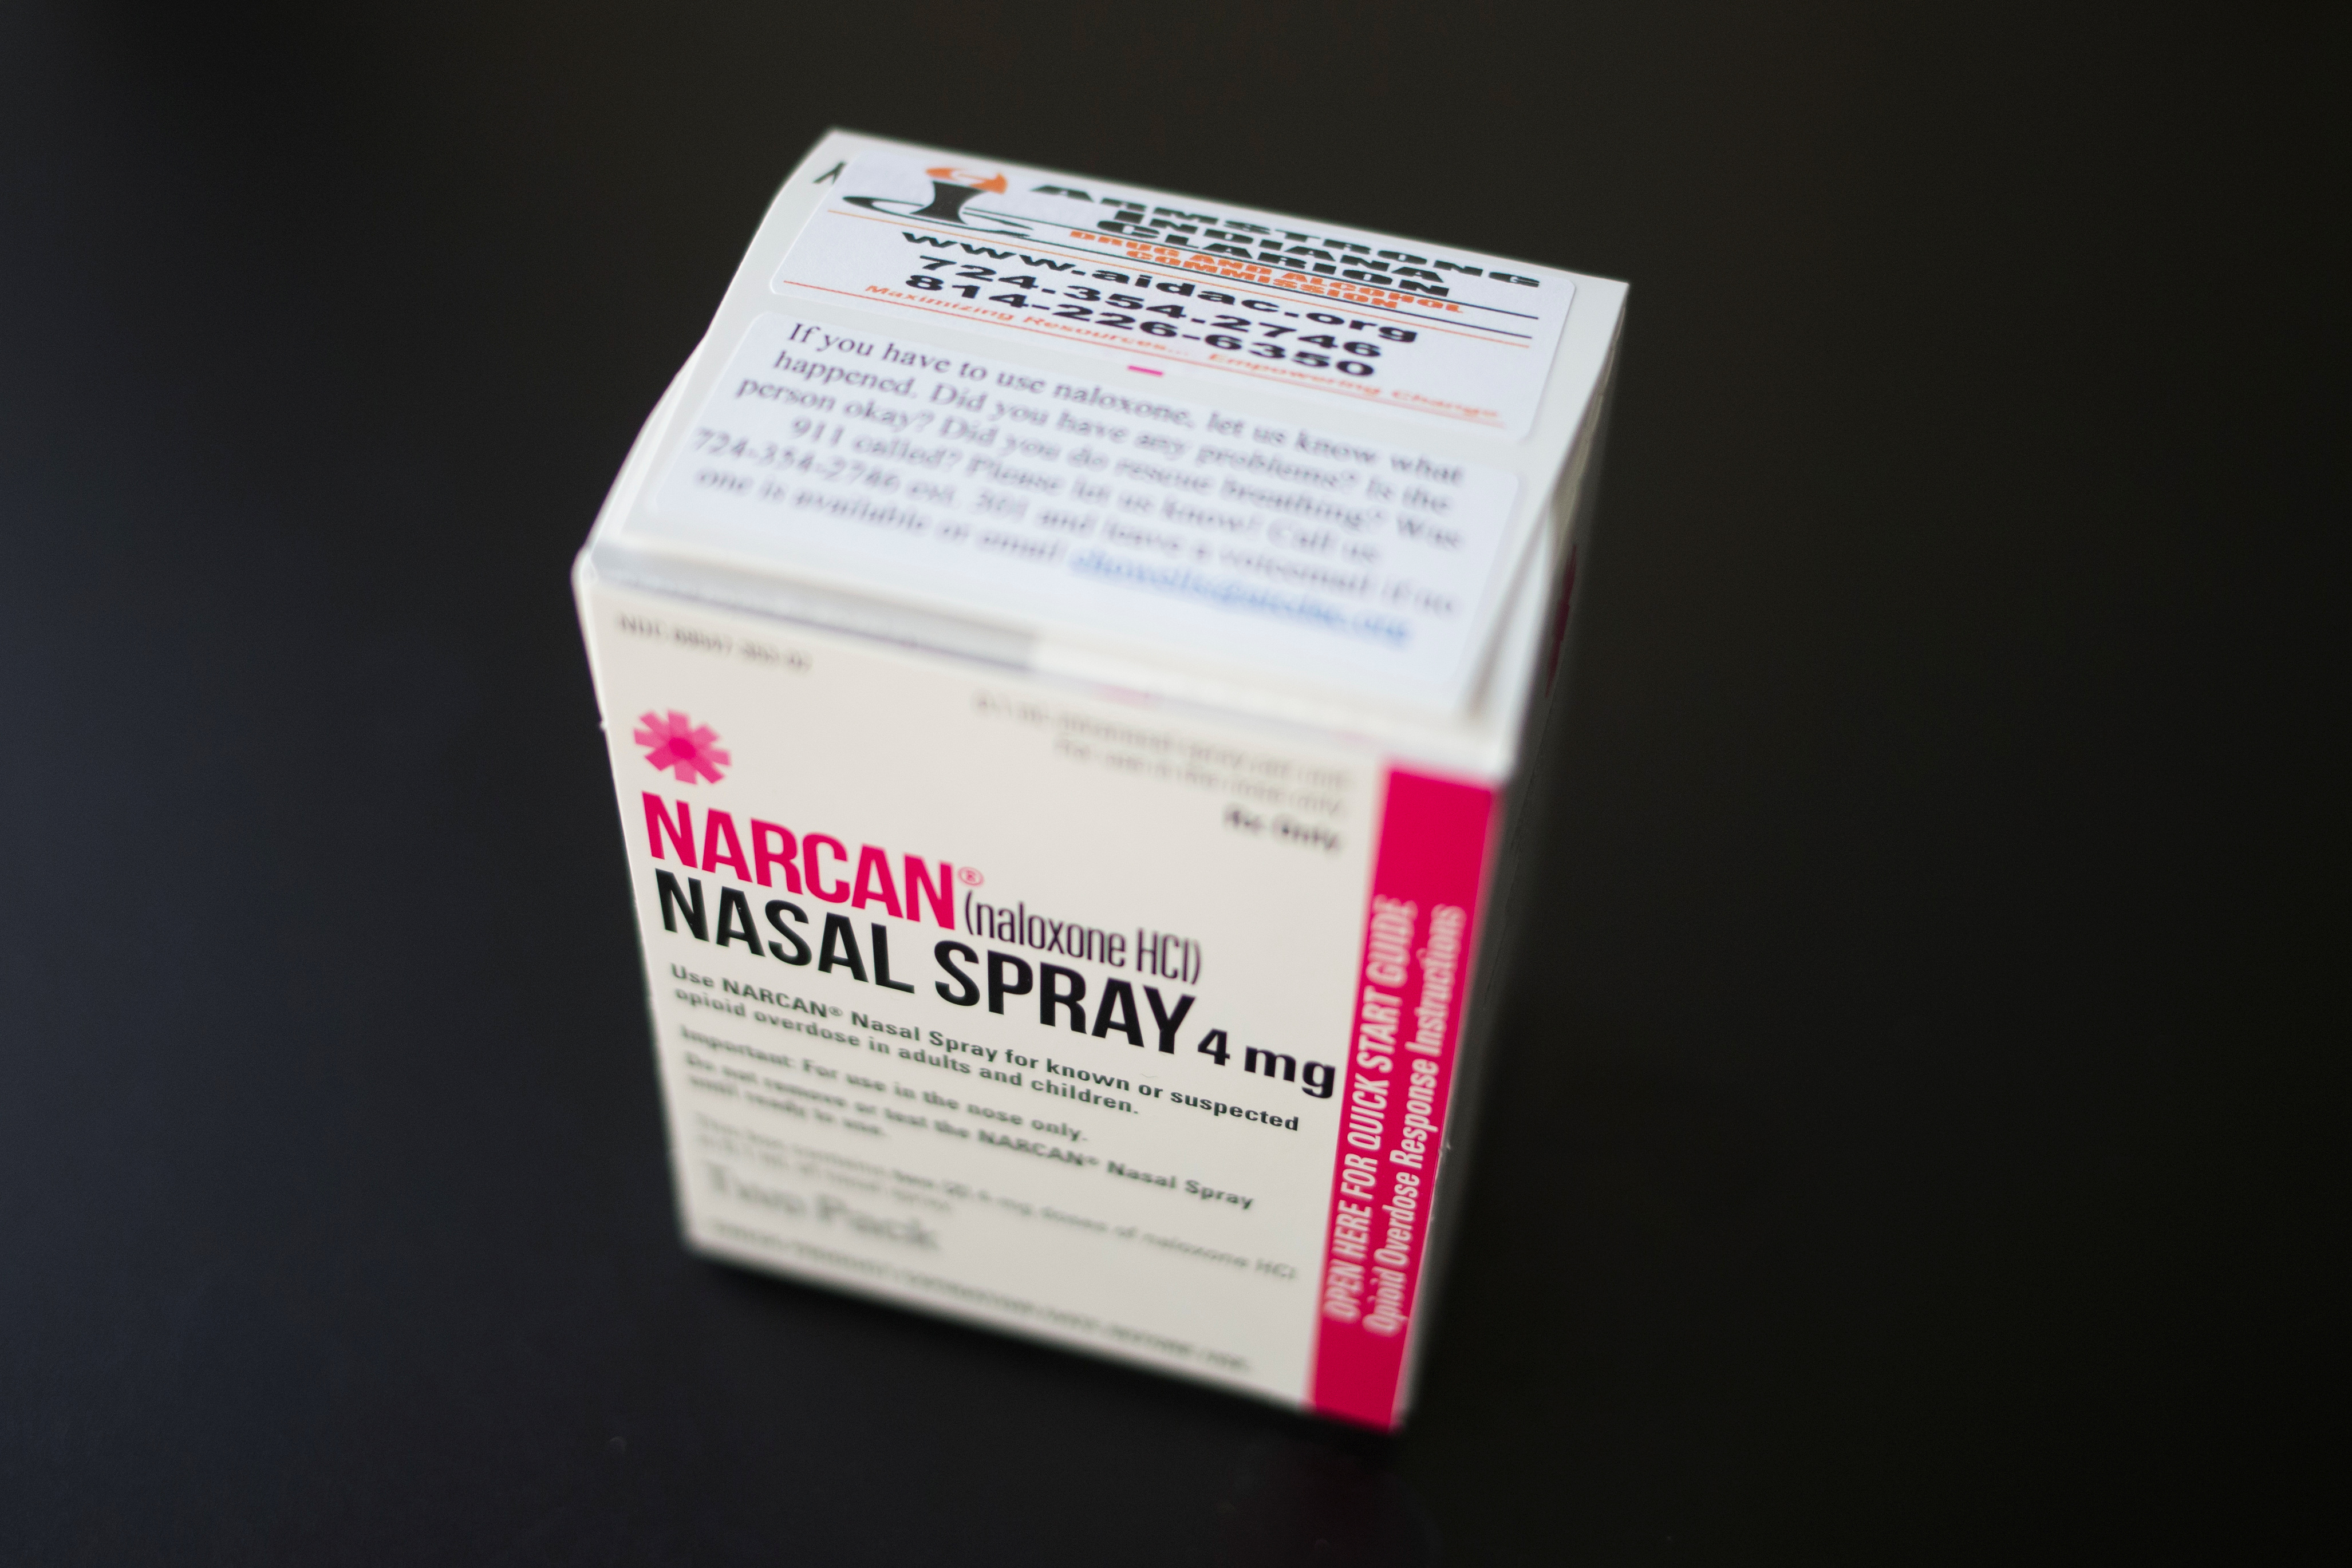 A box of NARCAN nasal spray is photographed at an outpatient treatment center in Indiana, Pennsylvania